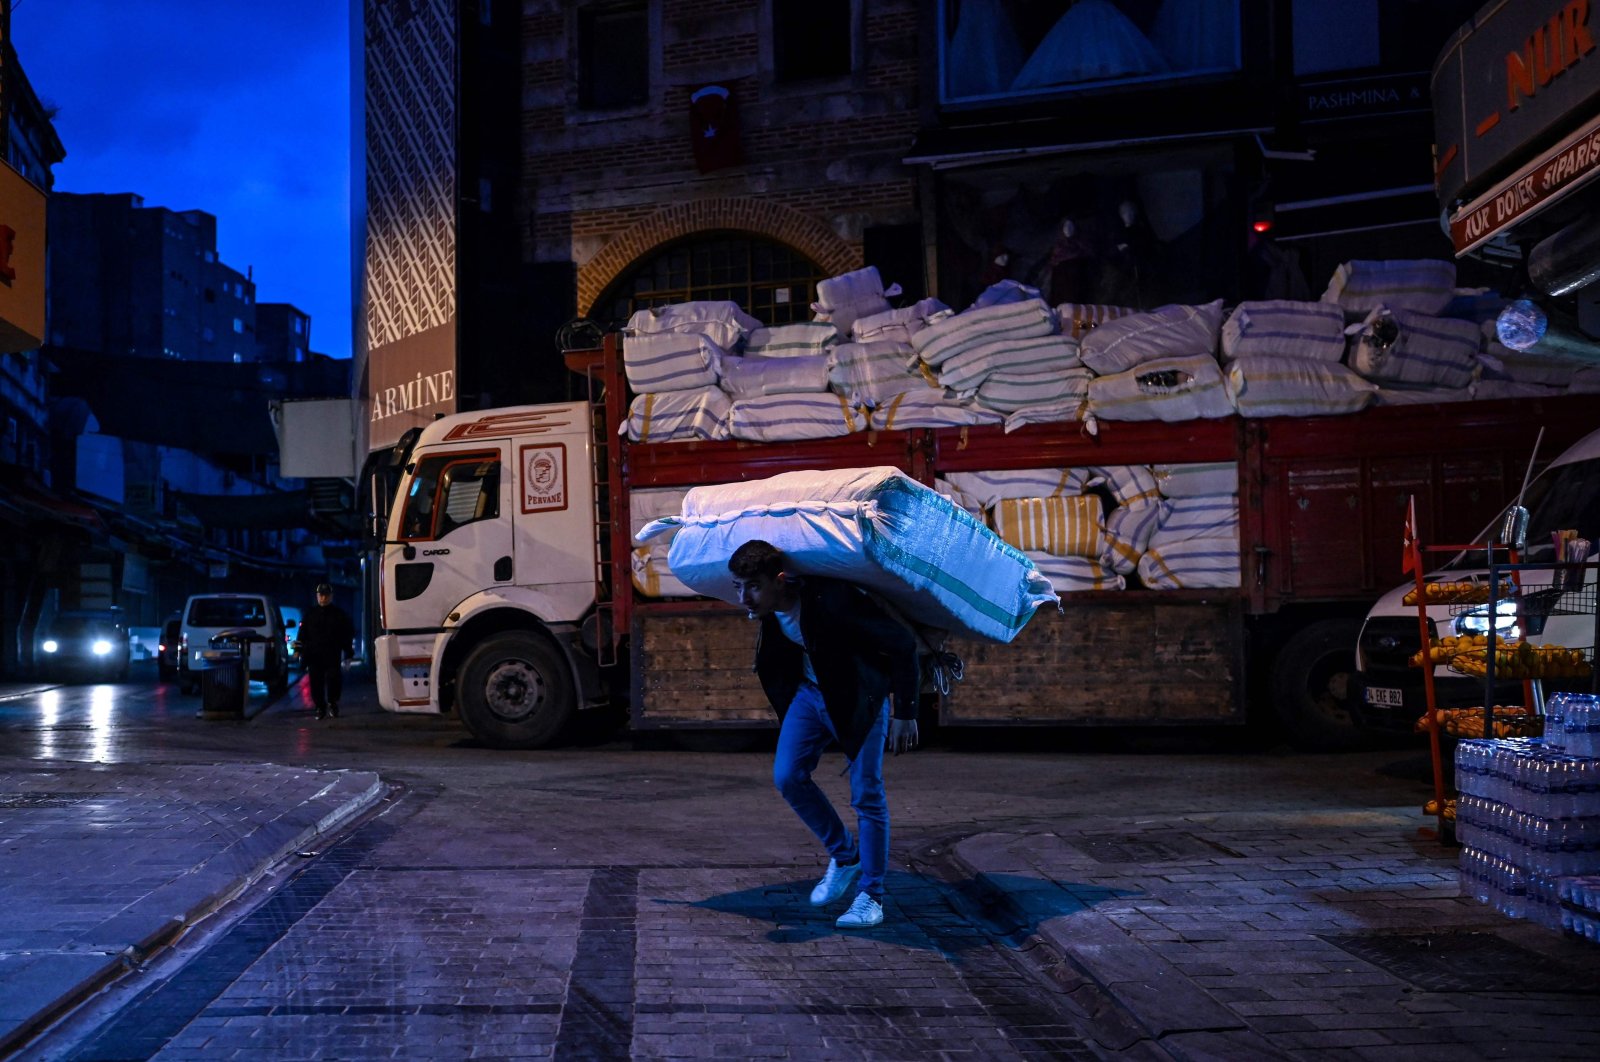 A porter carries belongings on a street near the Grand Bazaar in Istanbul, Turkey, Oct. 28, 2021. (AFP Photo)